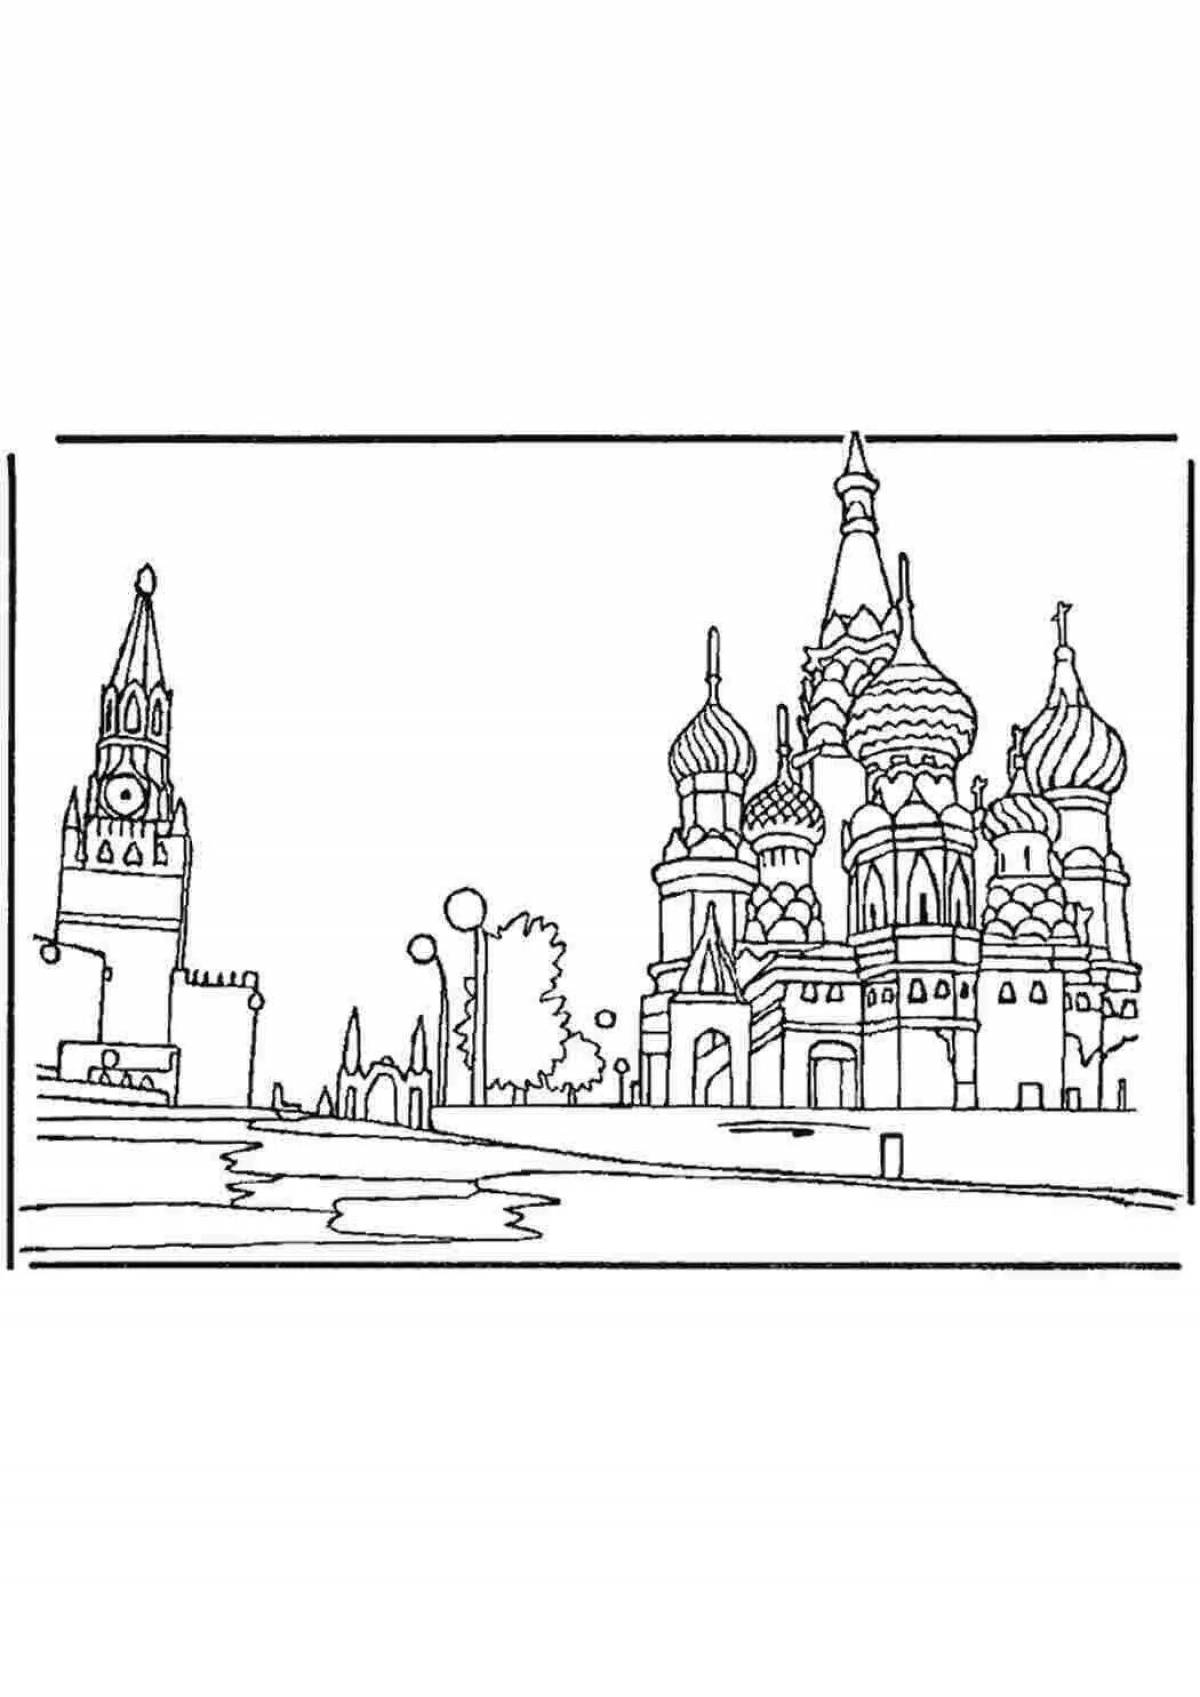 Colorful moscow grade 1 coloring book